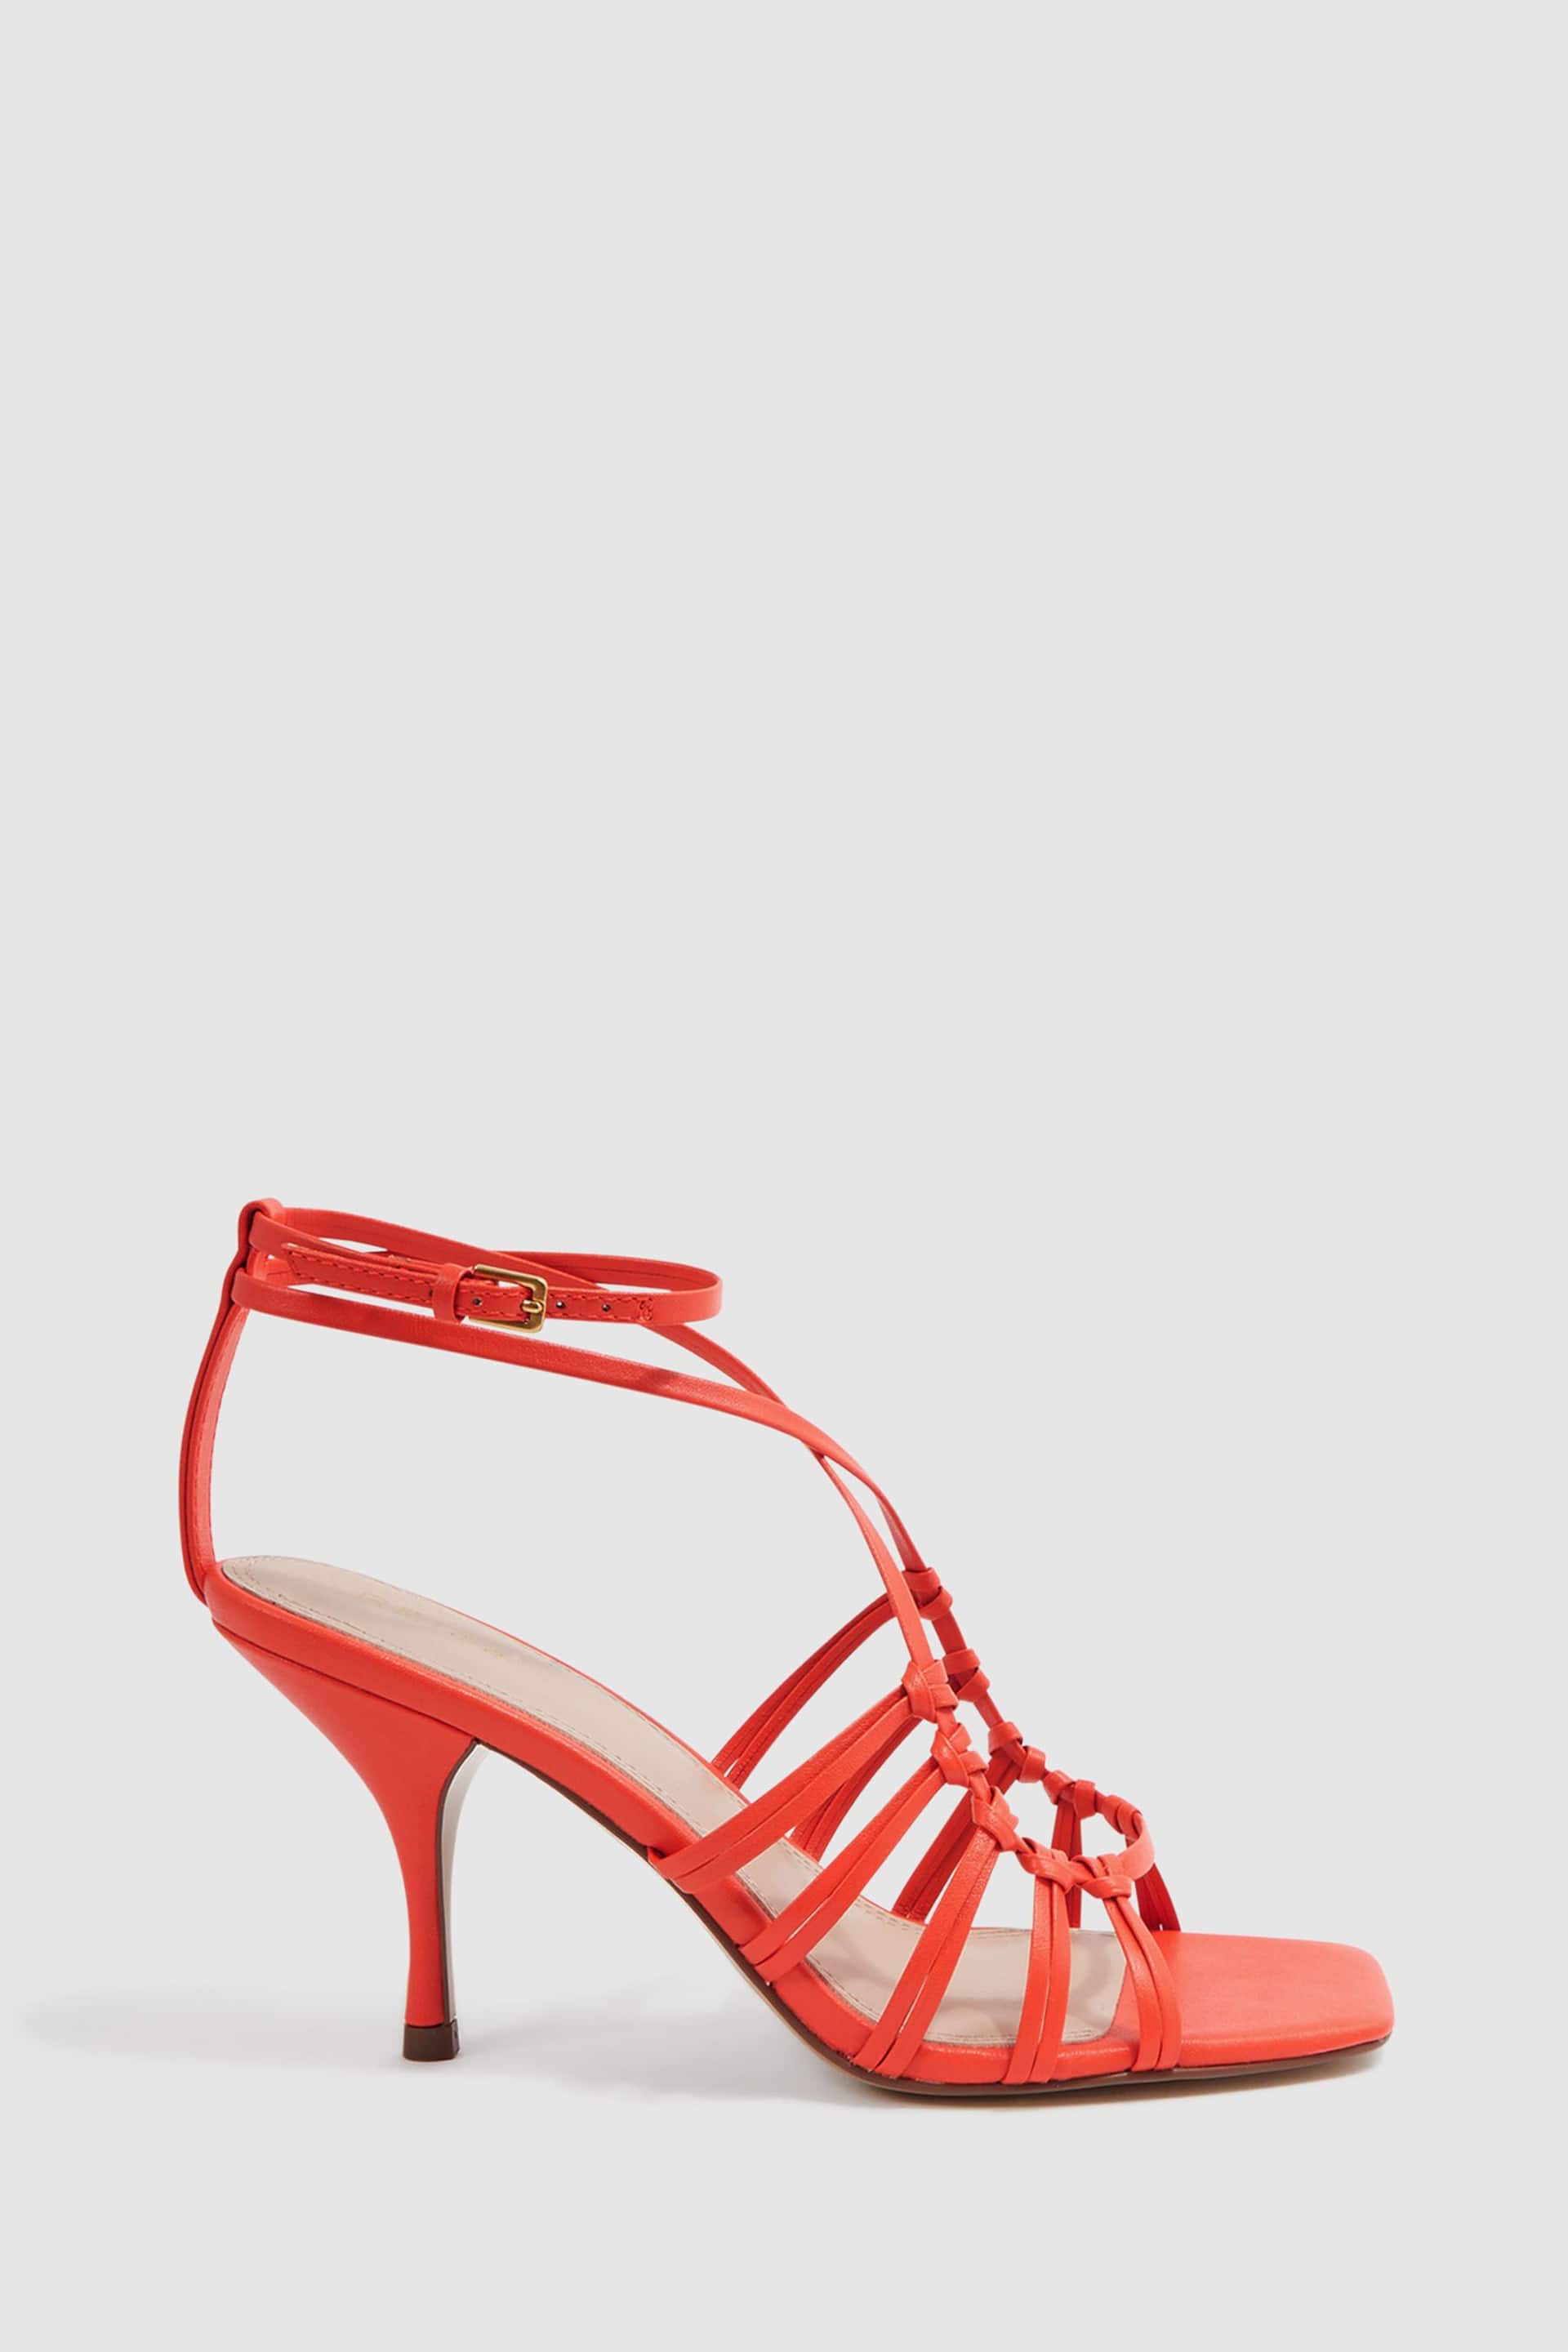 Reiss Coral Eva Leather Strappy Heels - Image 1 of 5